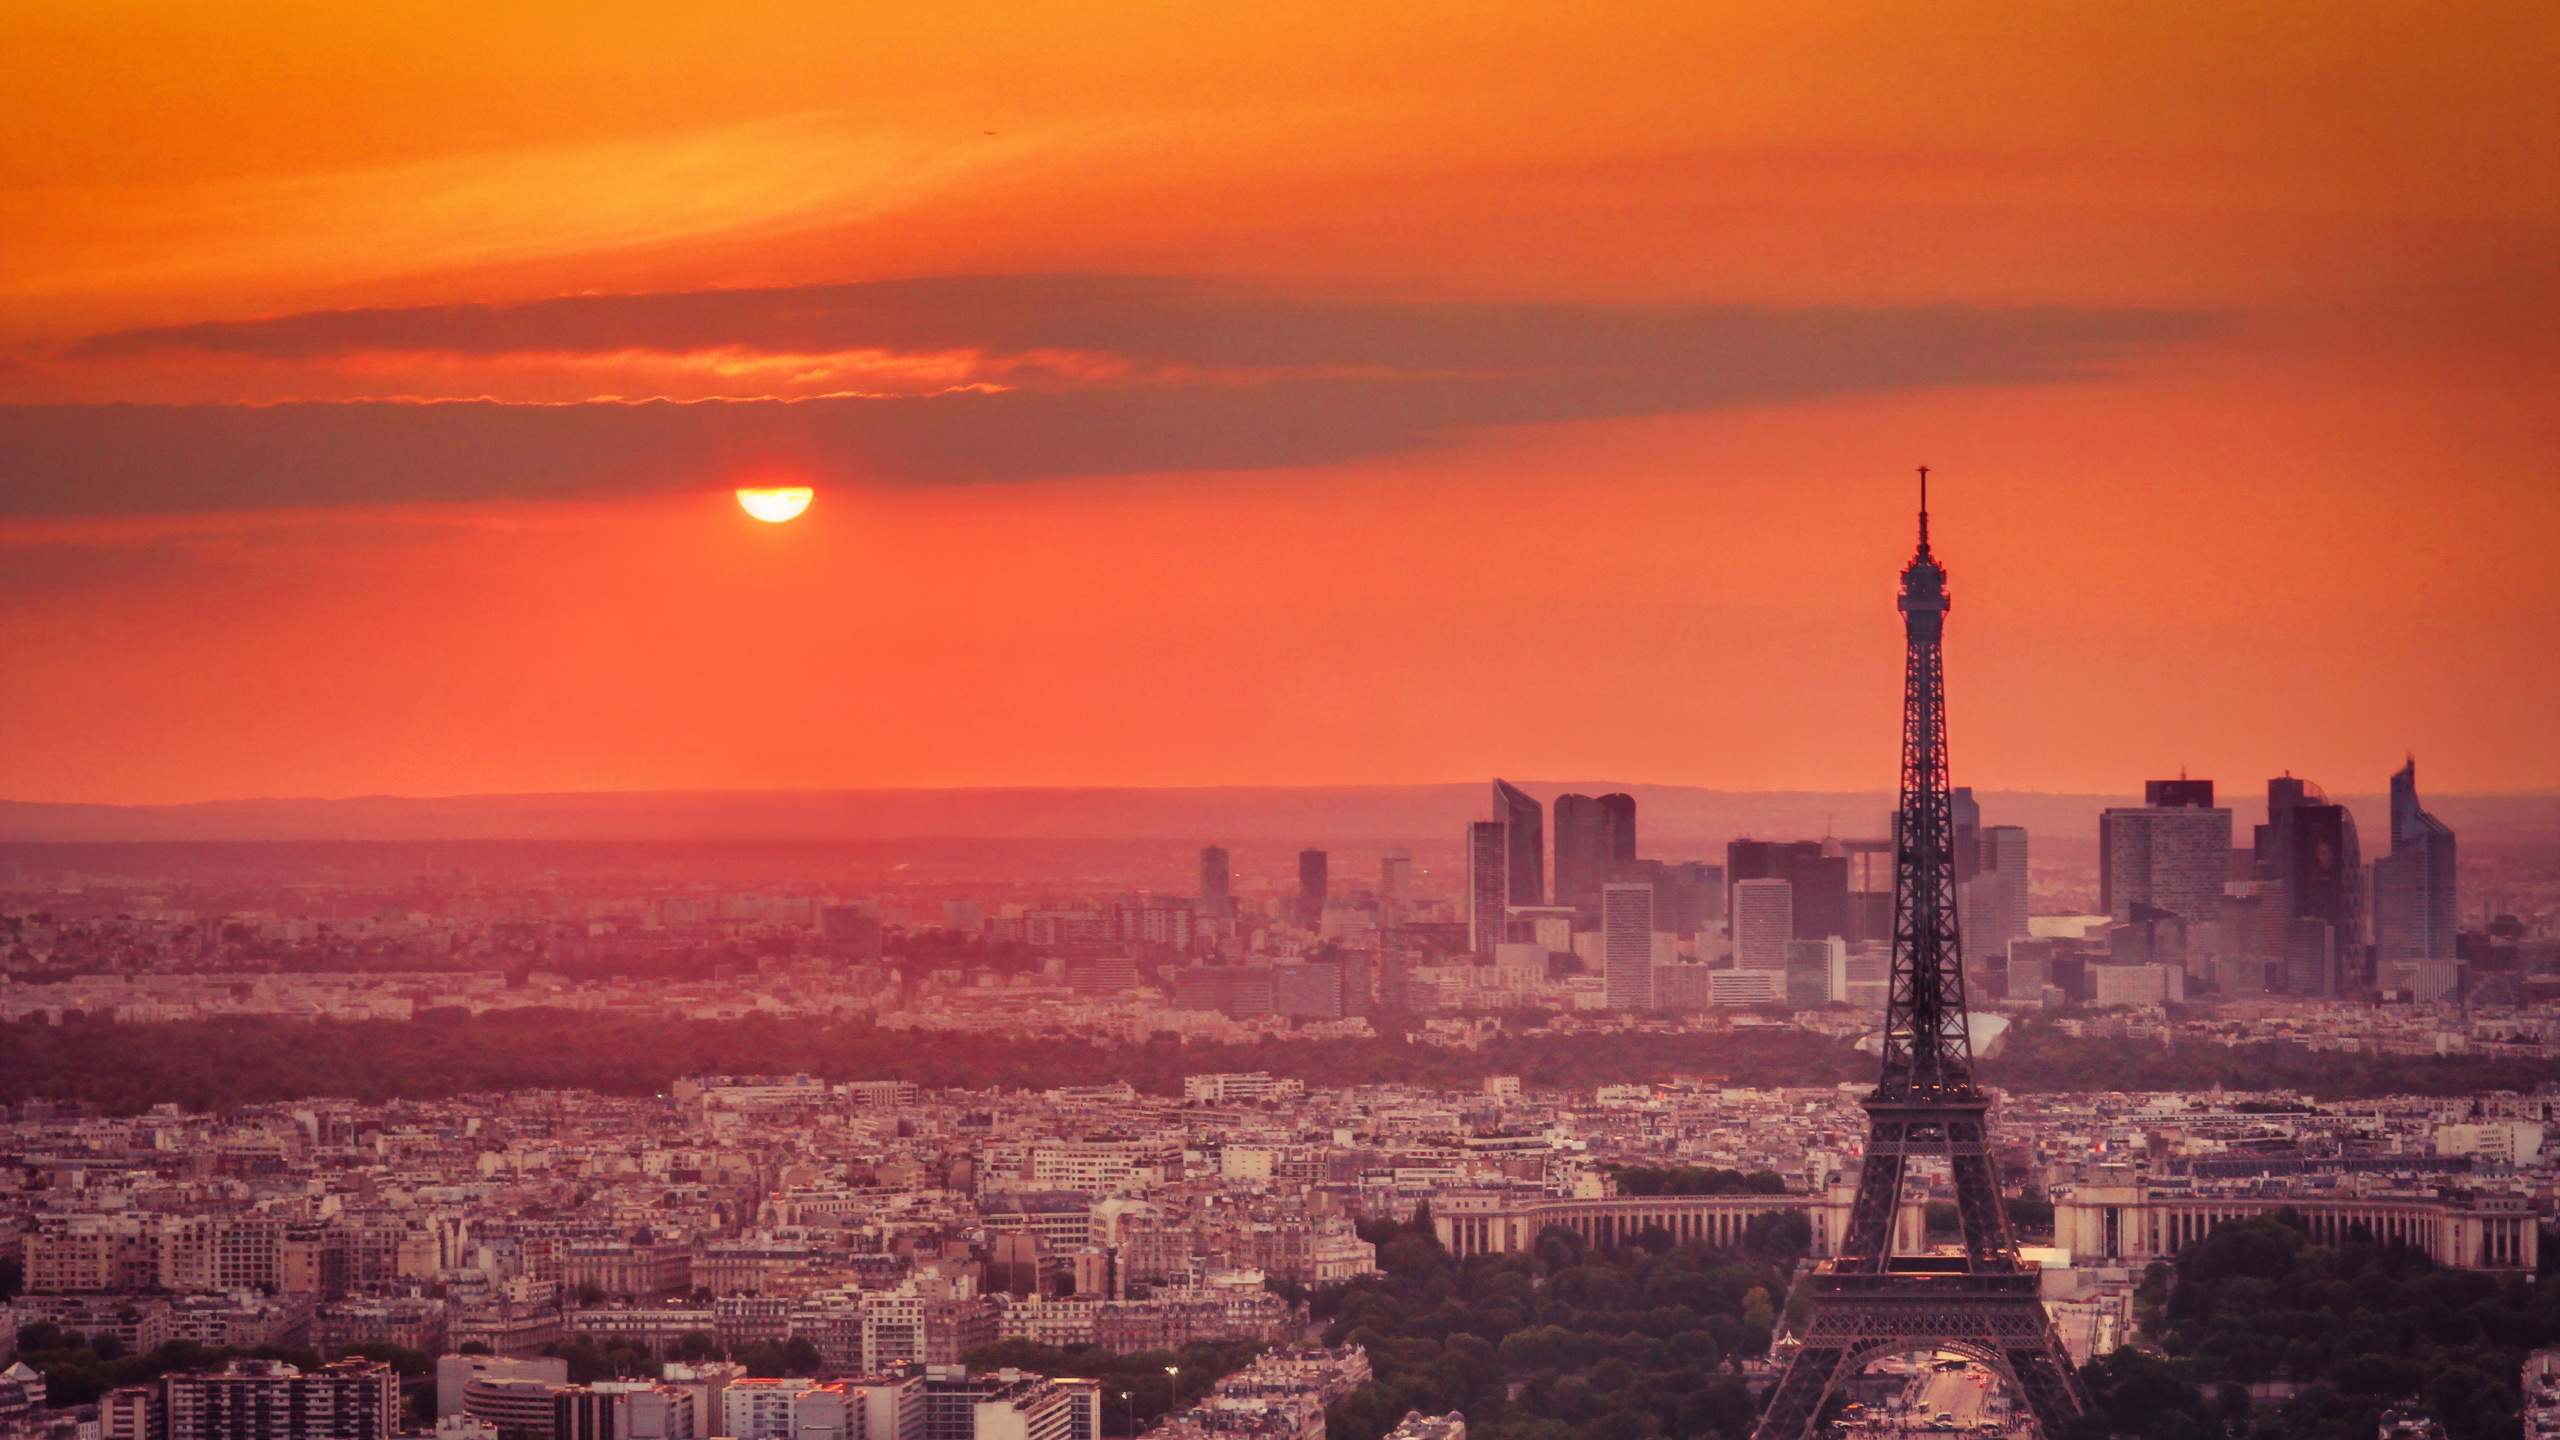 Paris Eiffel Tower And France Cityscape With Orange Sky Wallpaper During Sunset 2K Travel